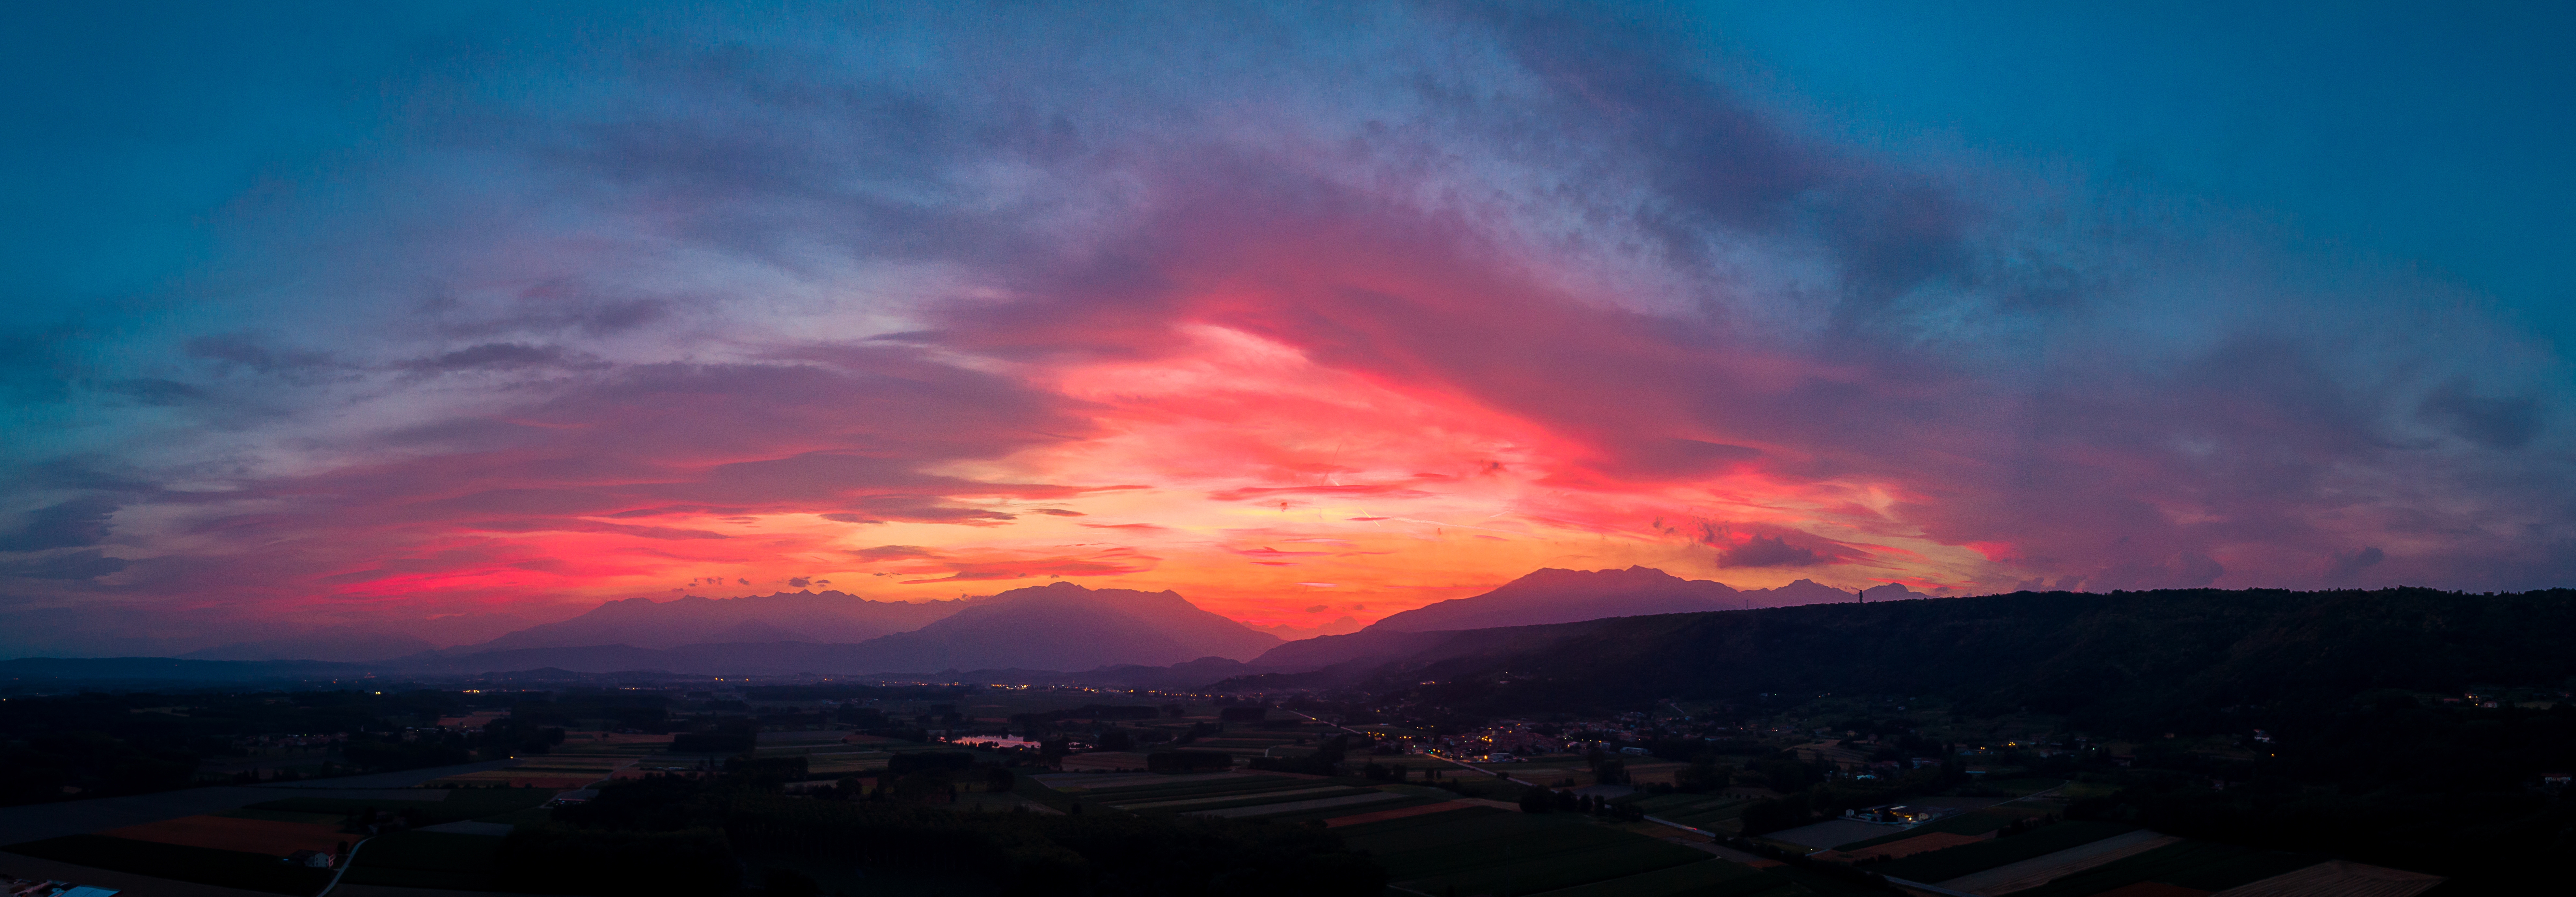 HD wallpaper, Afterglow, Sunset, Red Sky, Twilight, 8K, Mountains, 5K, Countryside